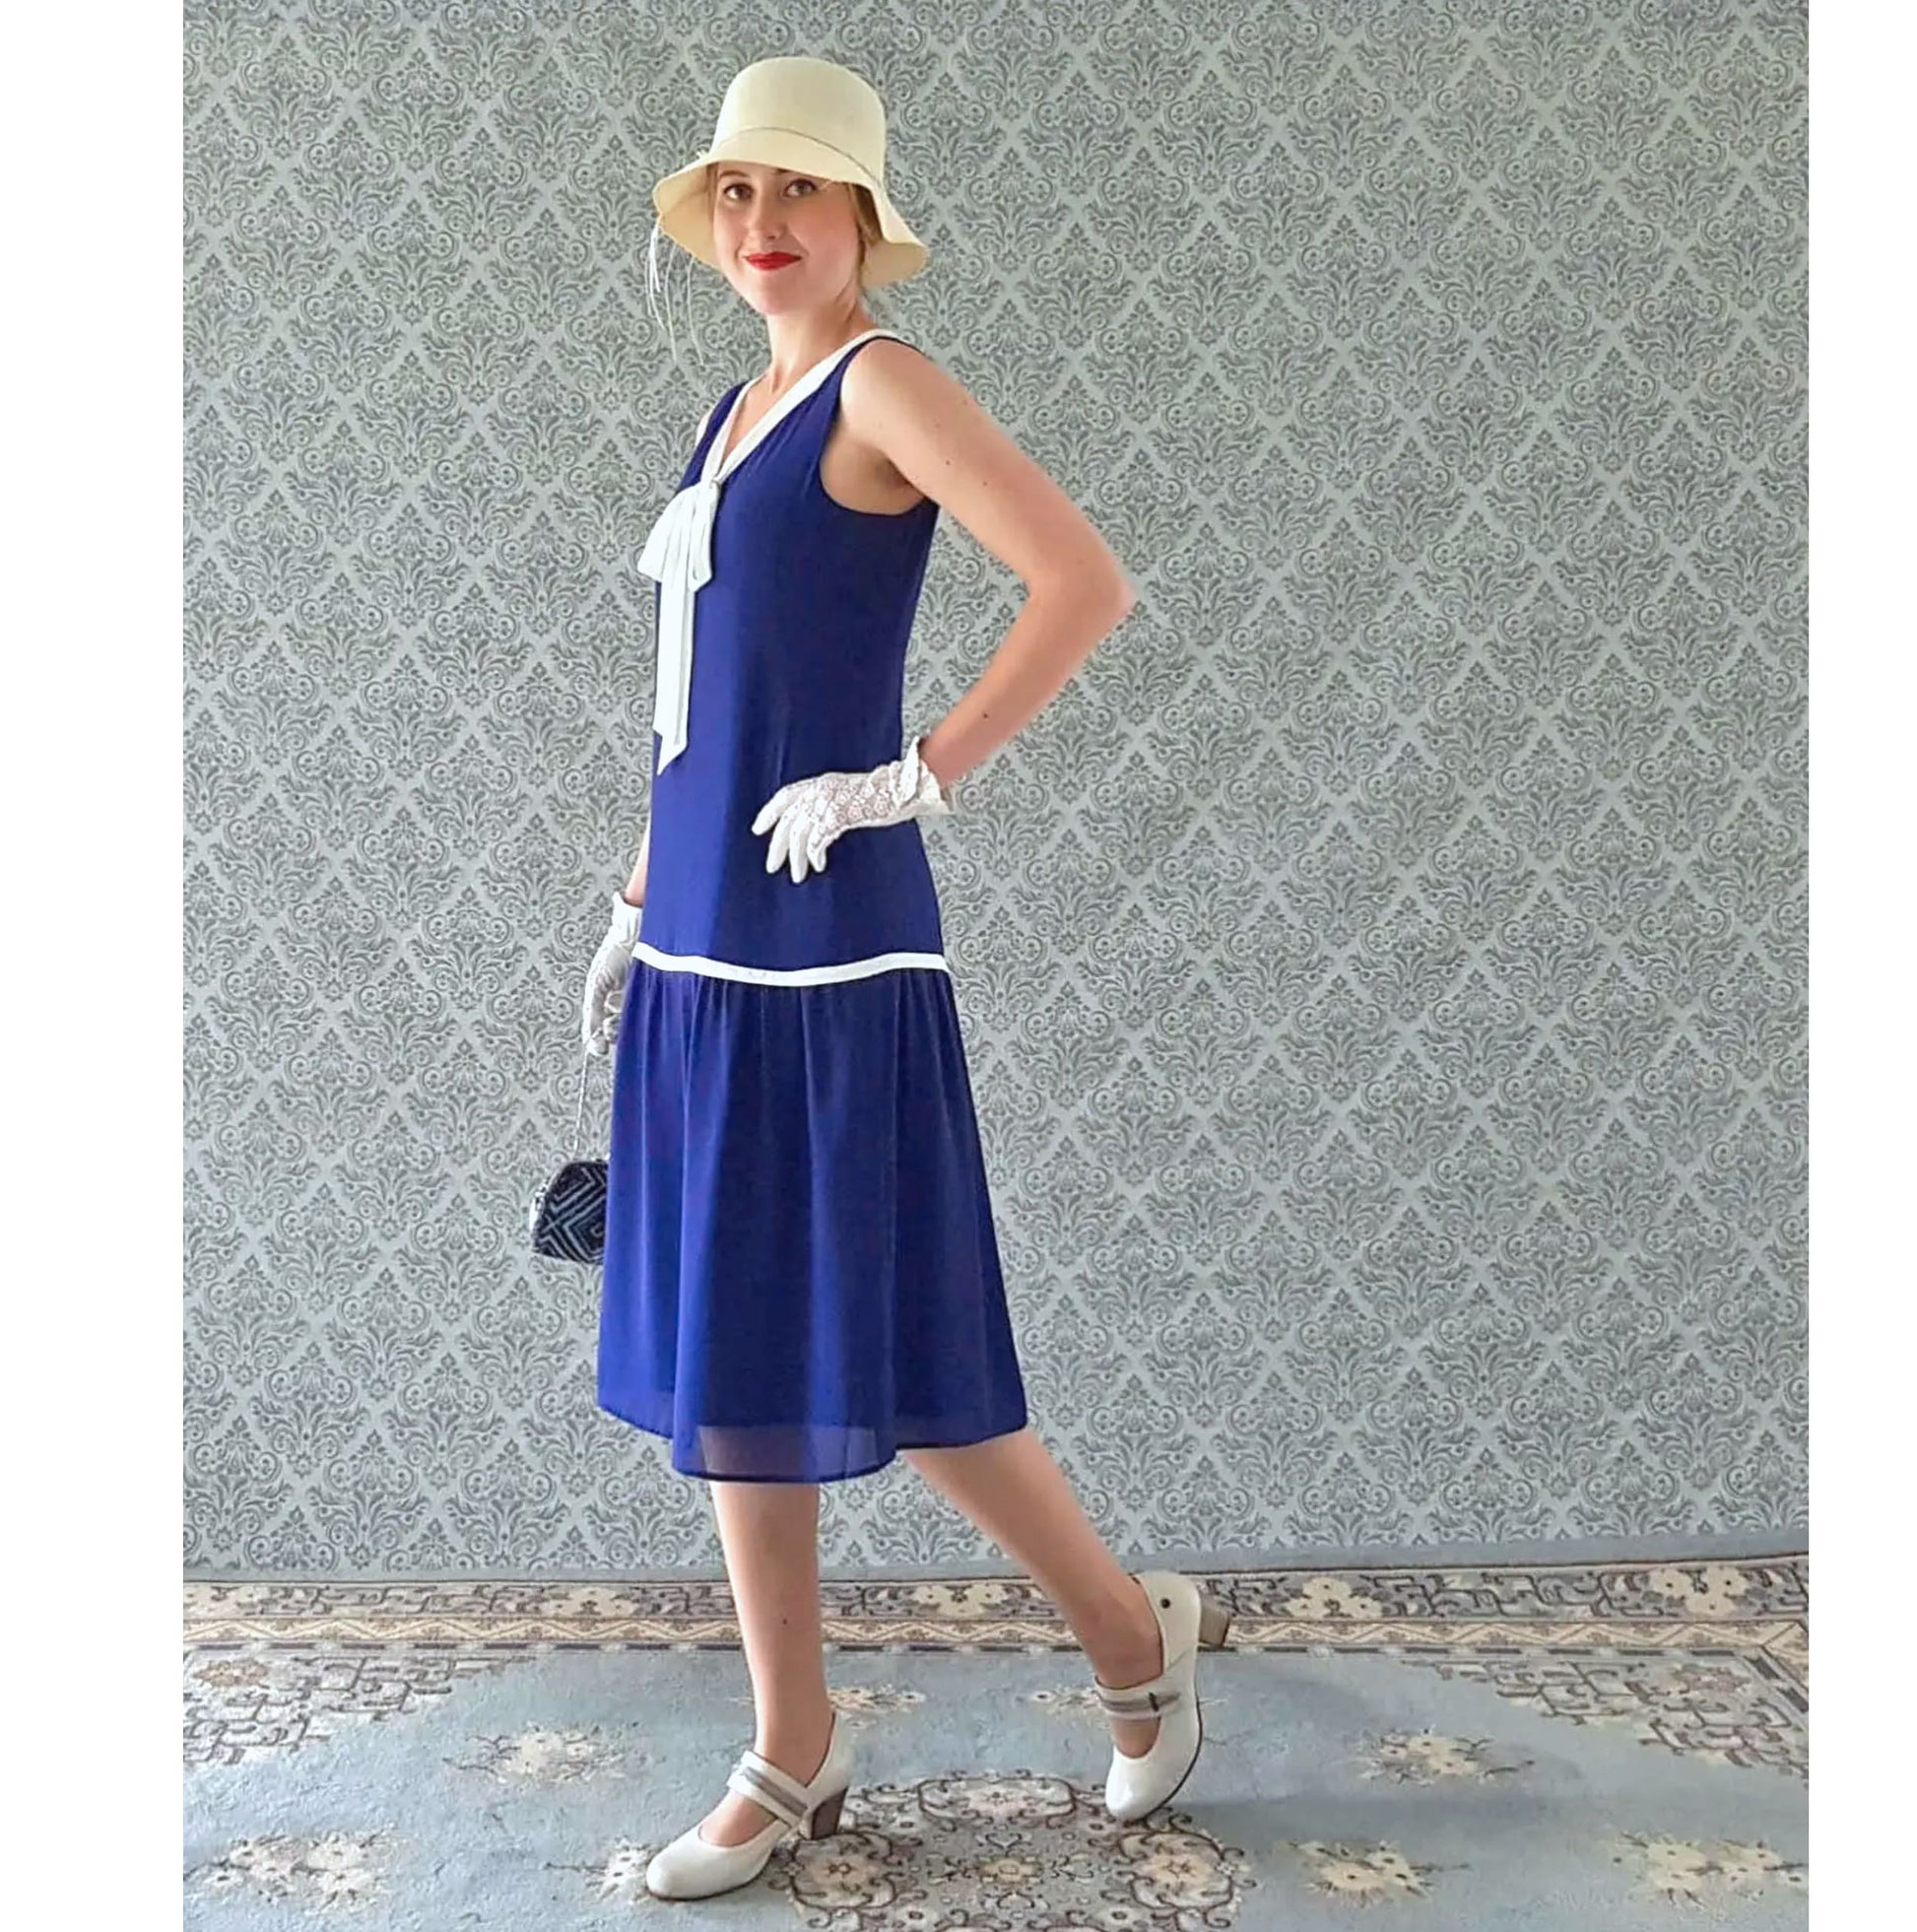 Dark blue nautical flapper dress with off-white details. Can be worn as a Great Gatsby dress, flapper dress, Art Deco dress or Charleston dress.